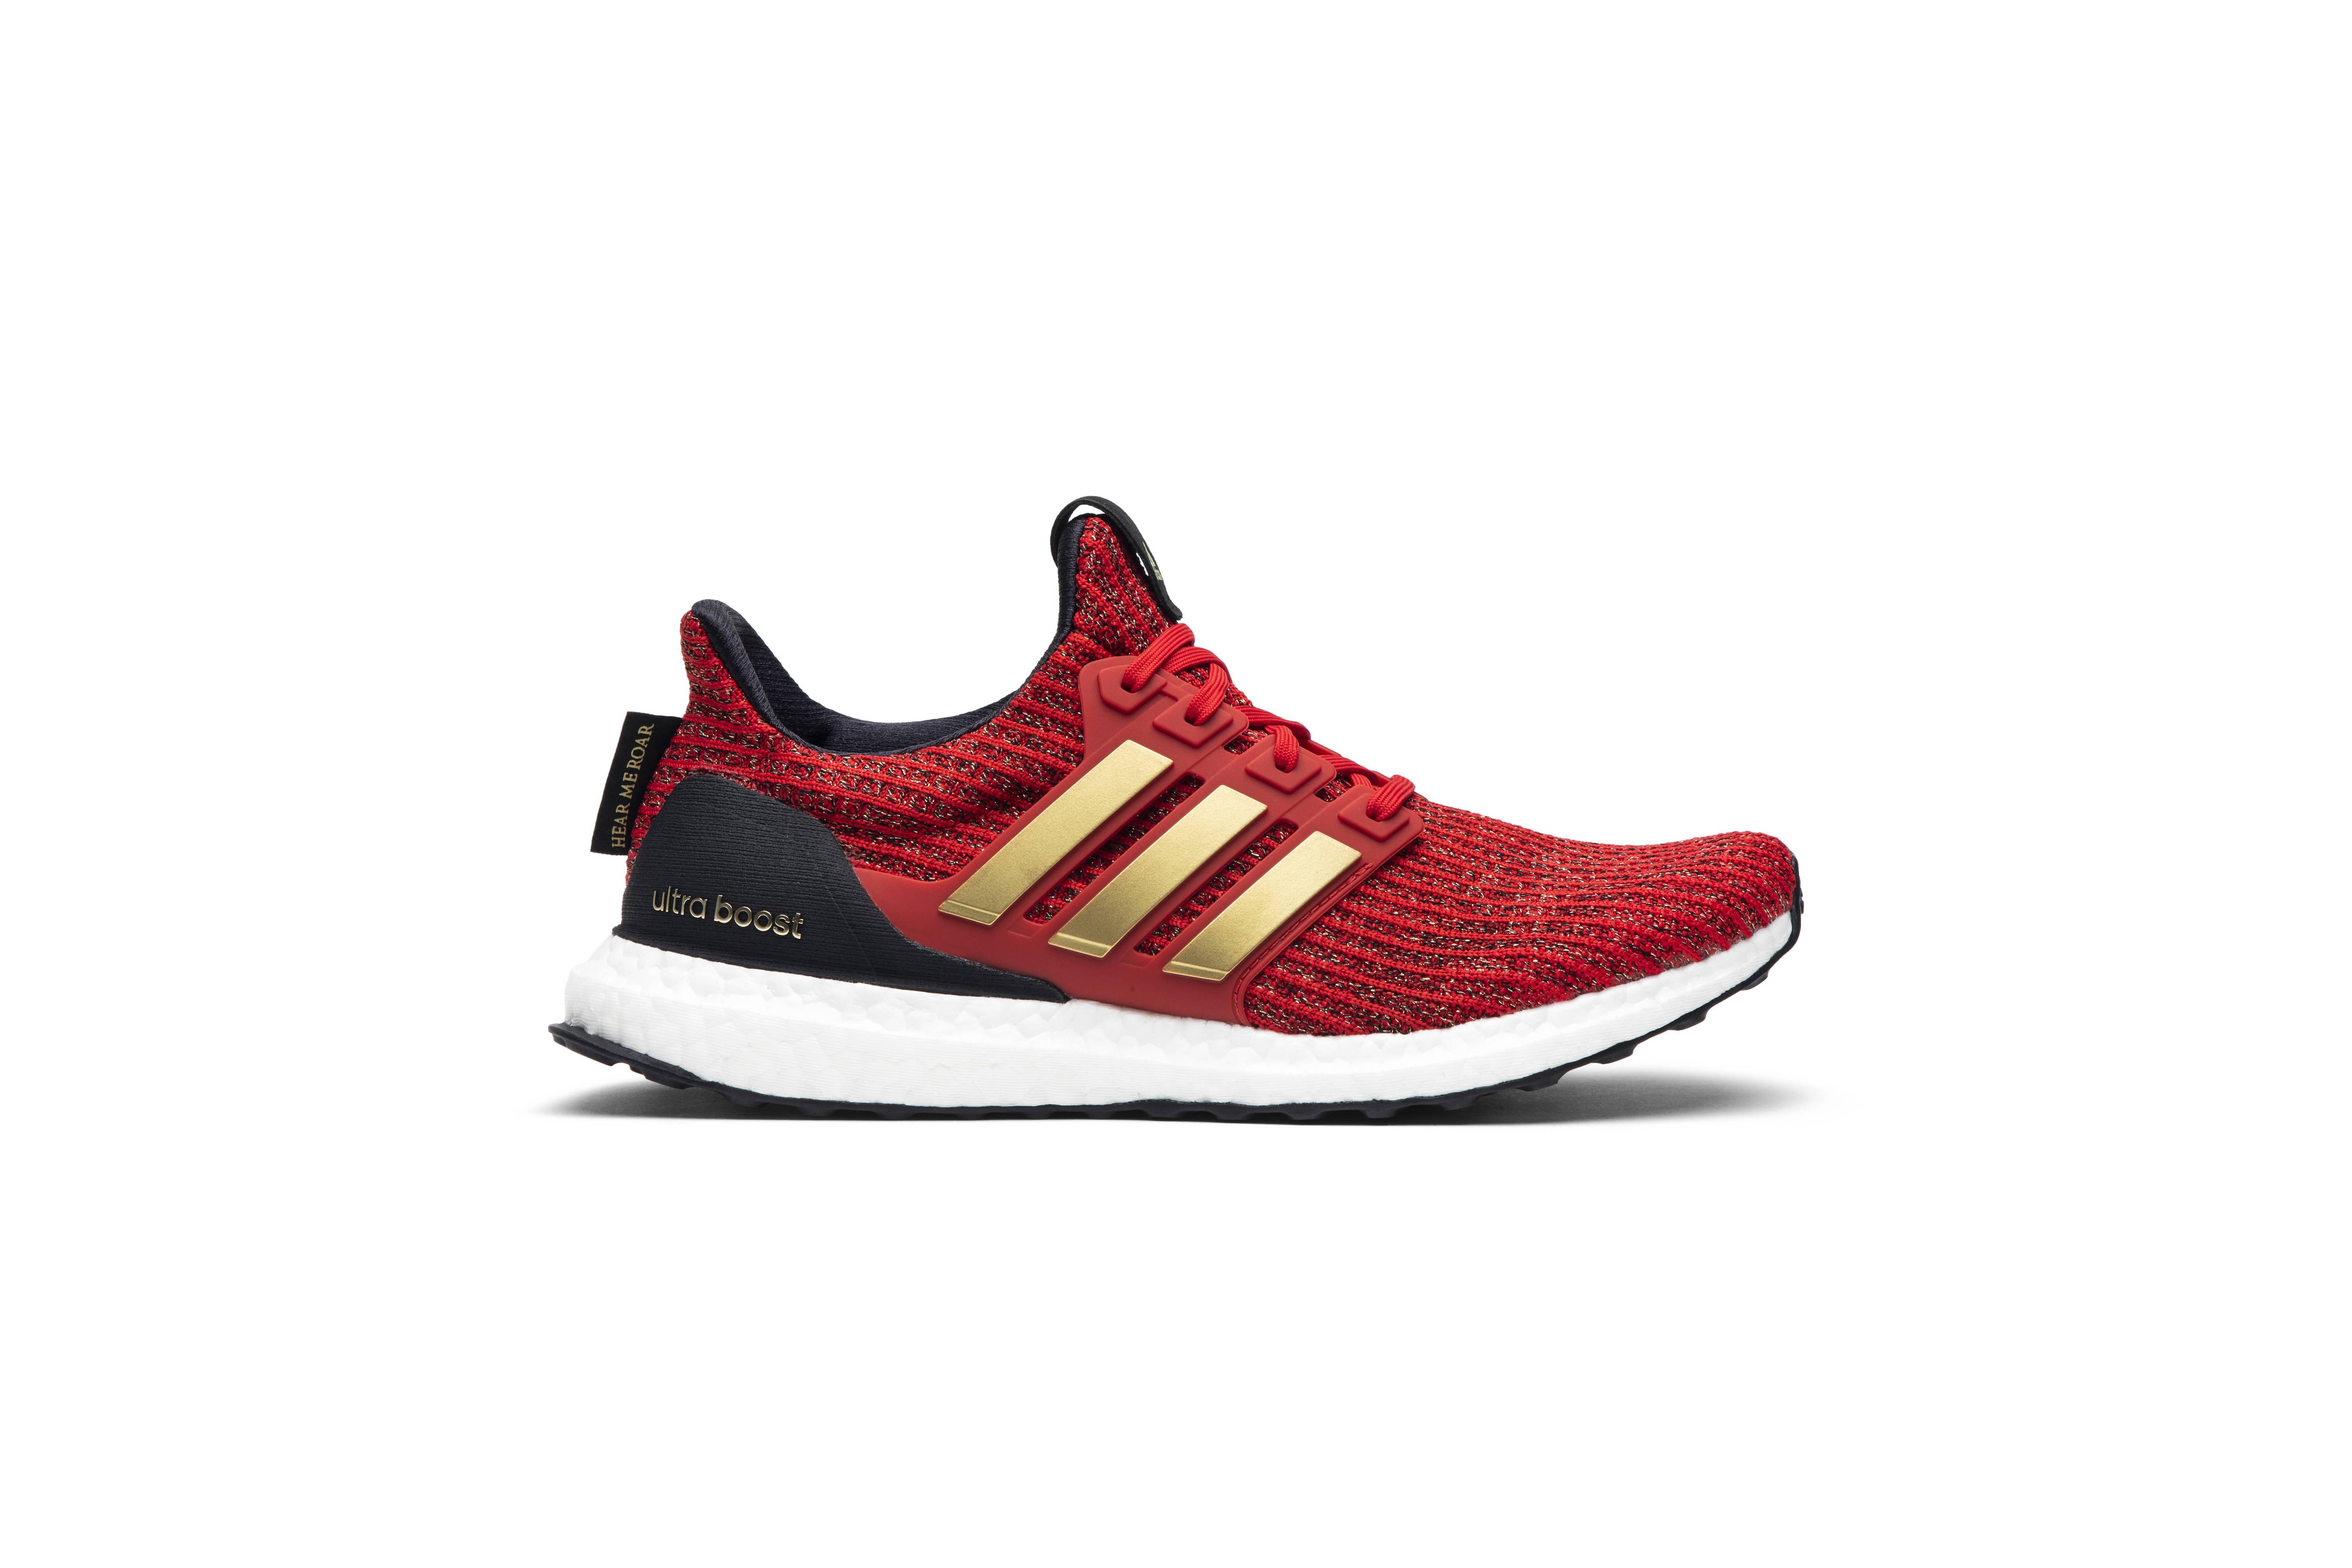 adidas Ultra Boost 'house Lannister' Shoes - Size 9 in Red/Black (Red) for  Men - Save 96% - Lyst